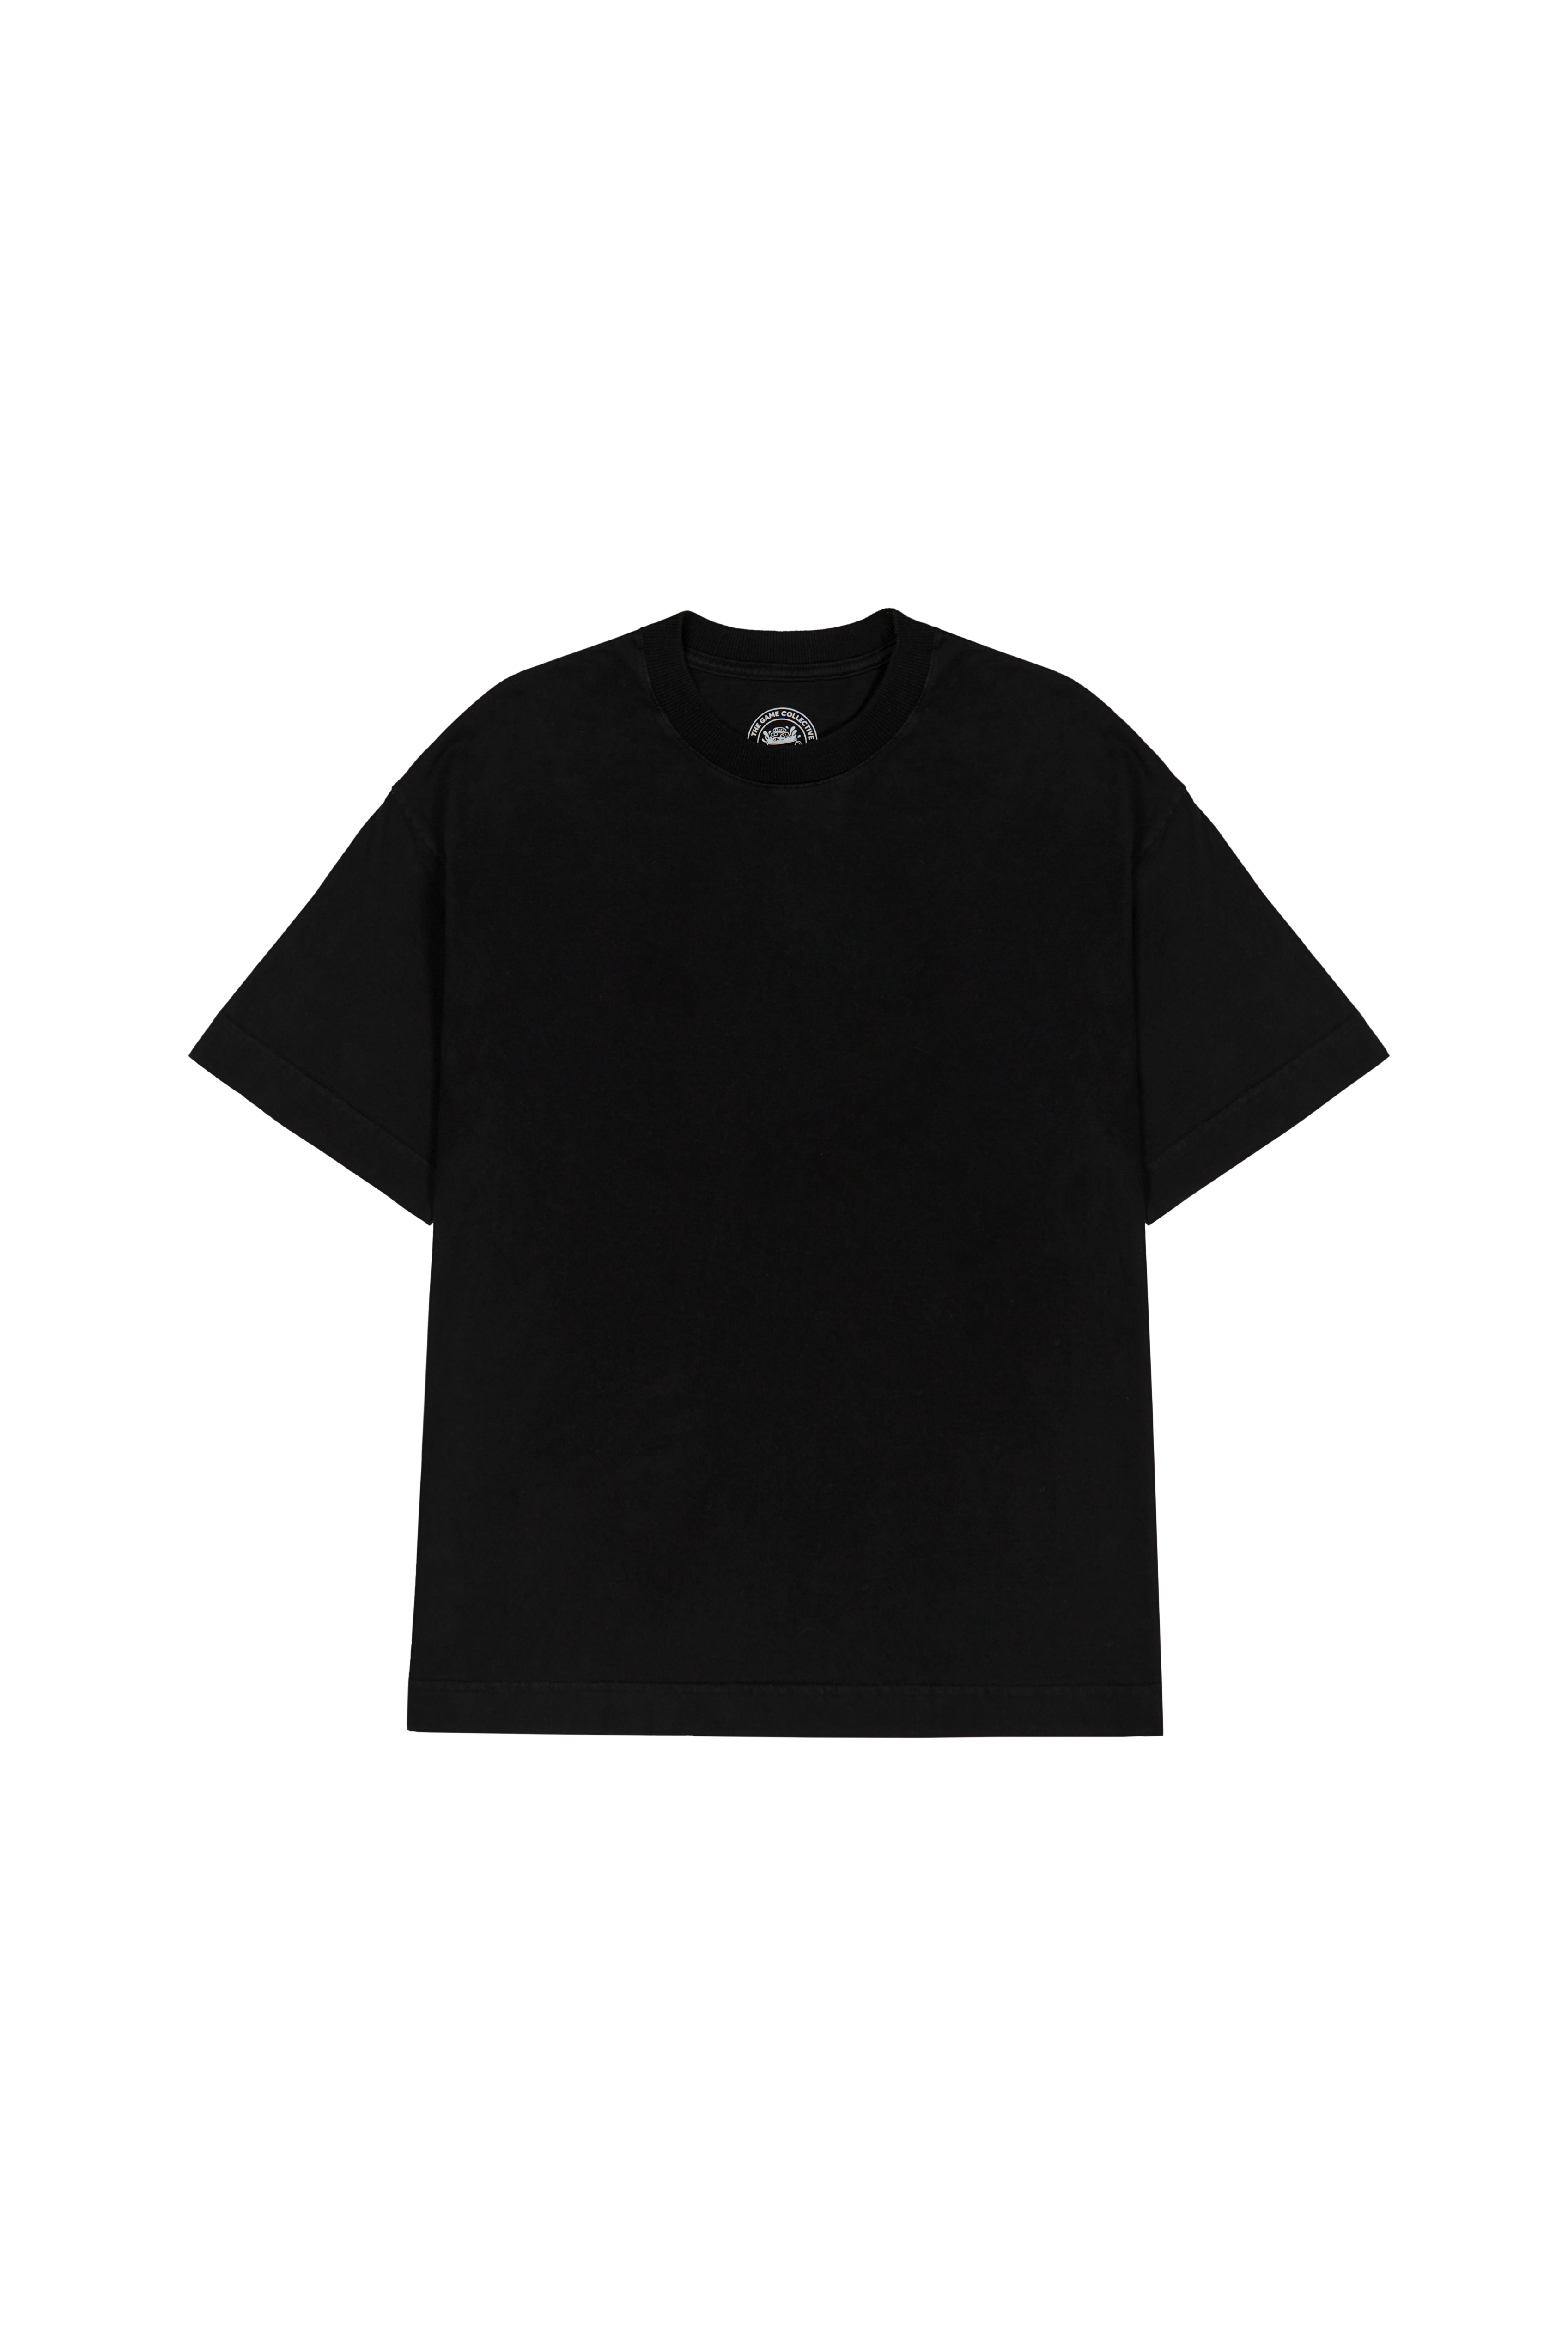 THE GAME - Not That Basic Tee® "Black"